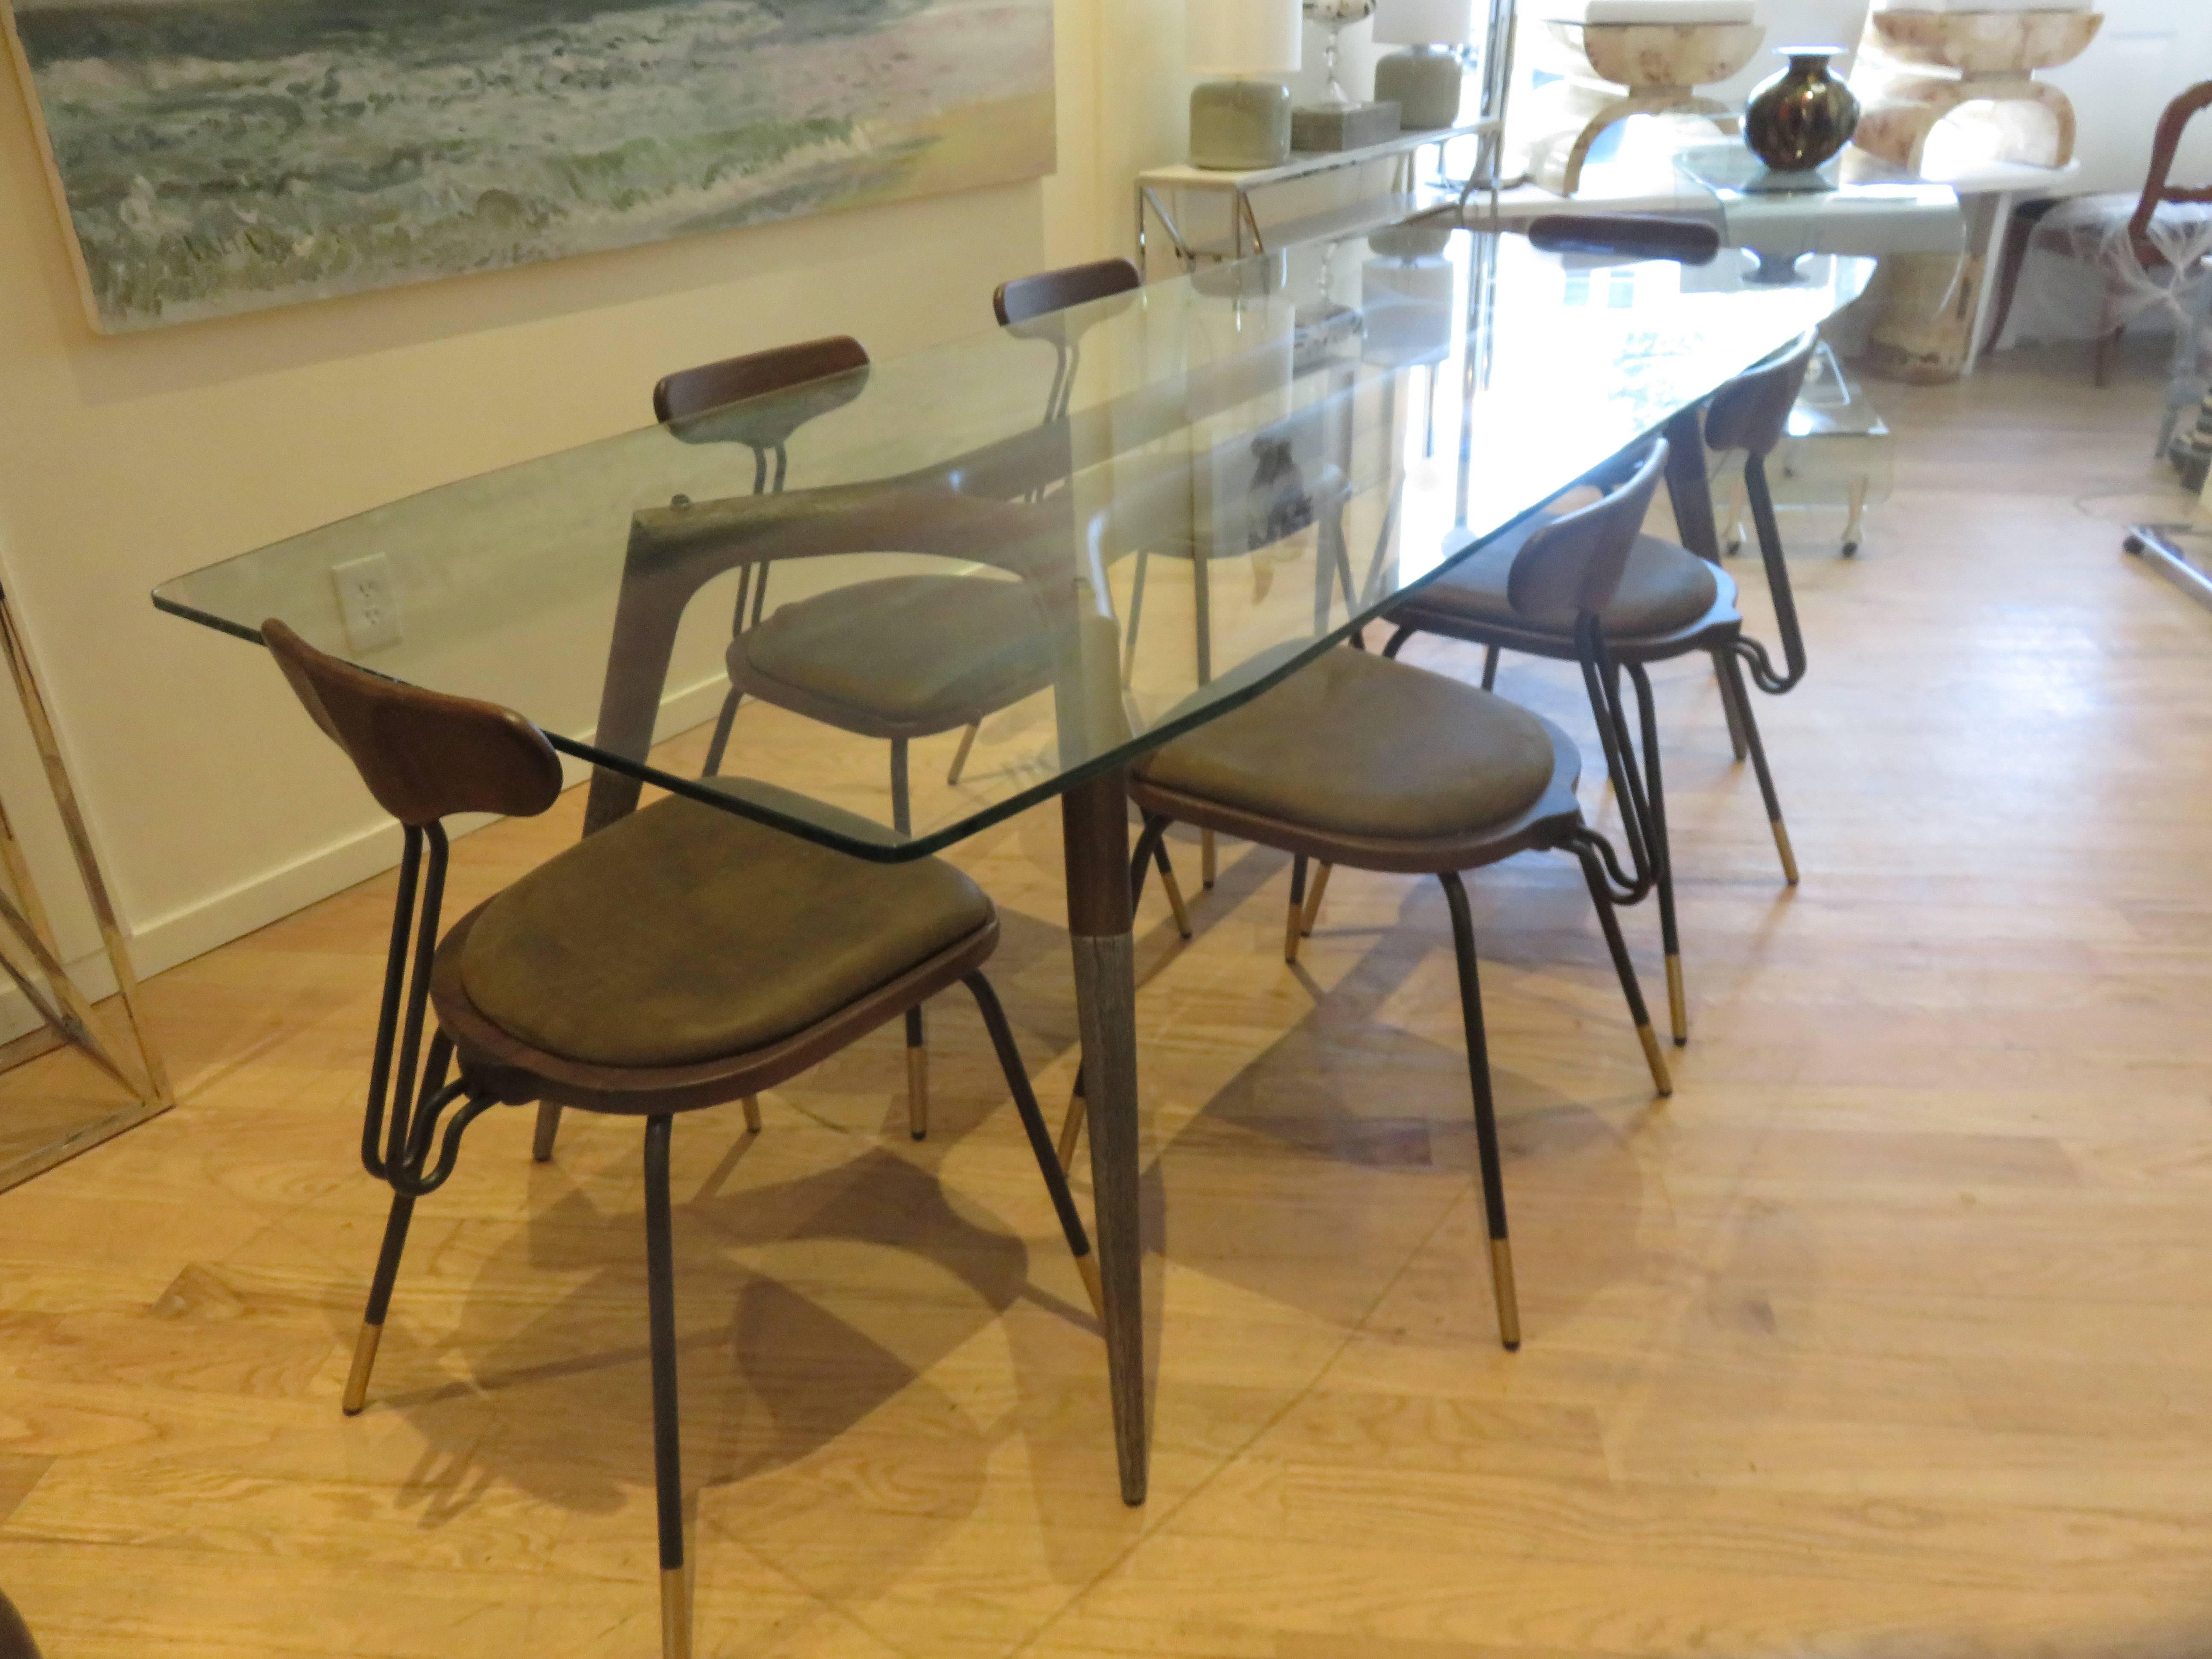 Walnut wood base with hammered steel to half of leg, half inch thick glass top,with cut angles on all four corners.
Six matched chairs with rich brown leather seats,premium quality Italian construction.The table can be sold separately,as with the